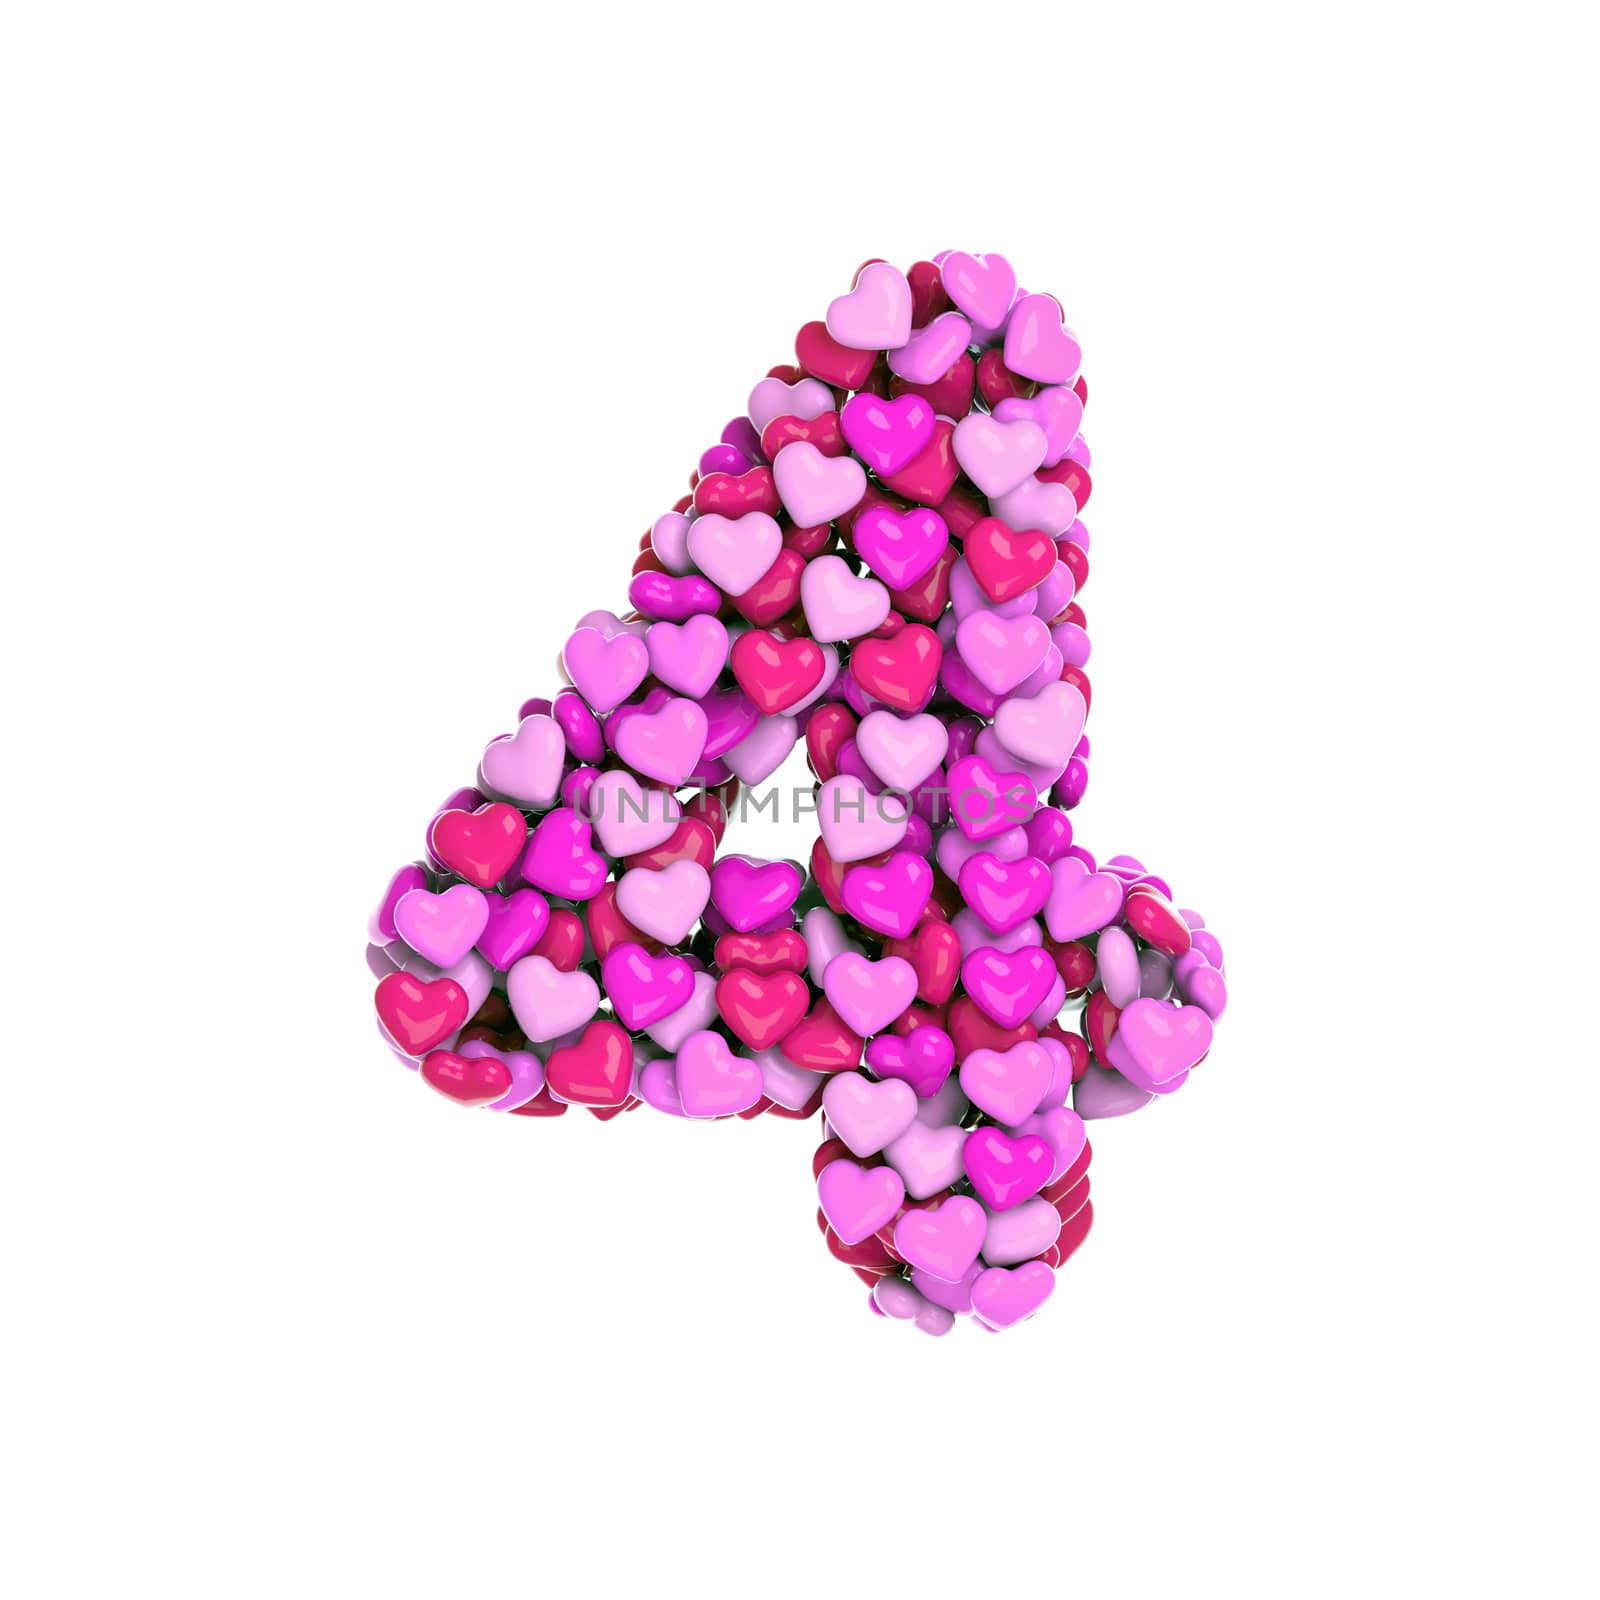 Valentine number 4 -  3d pink hearts digit - Love, passion or wedding concept by chrisroll